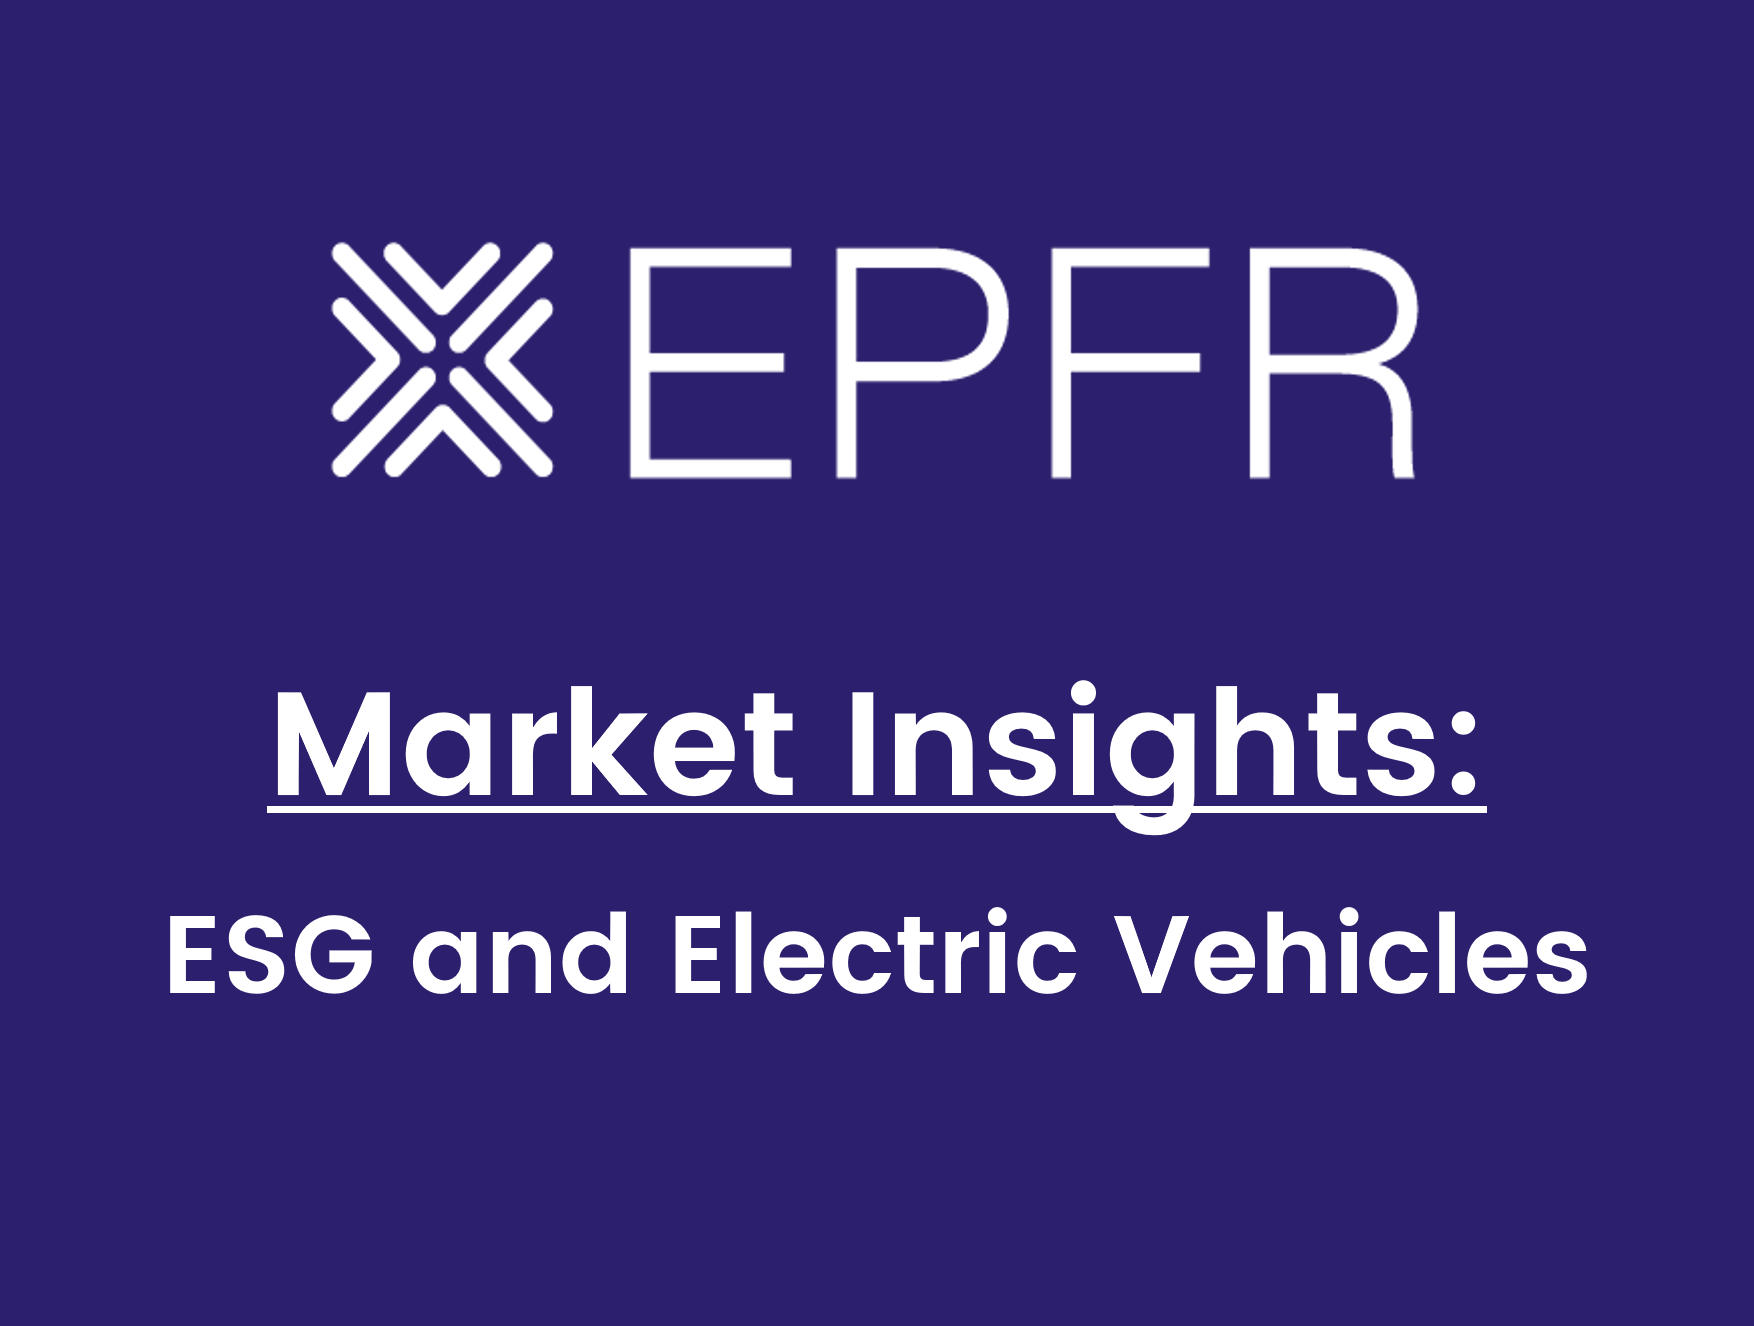 "EPFR Market Insights: ESG and Electric Vehicles"